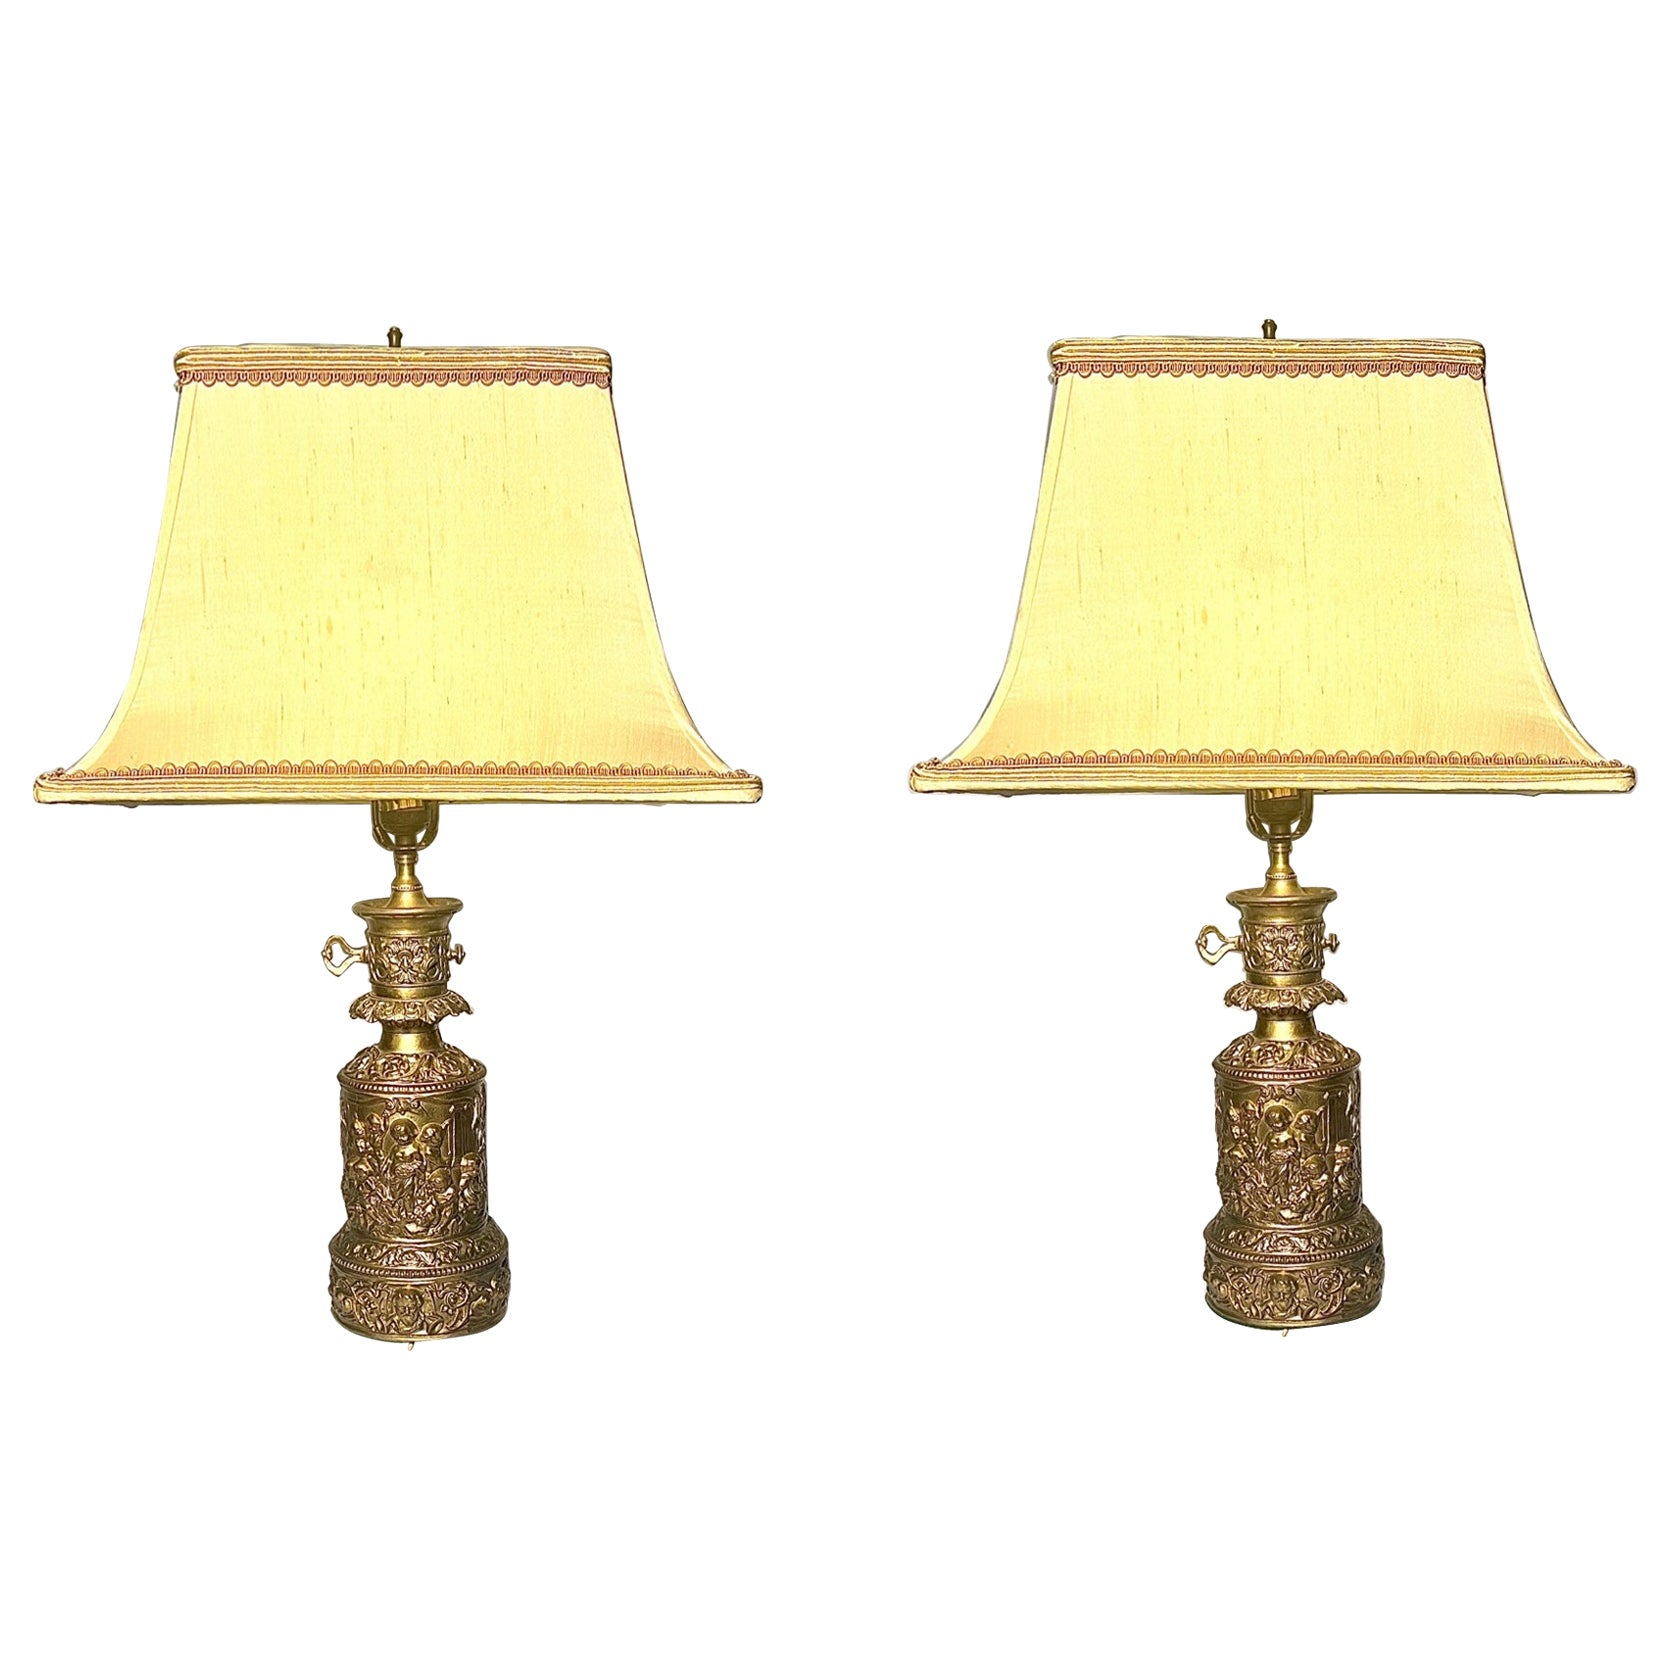 Pair of Antique French Parcel Gilt and Repousse Brass Oil Lamps, Circa 1830-1840